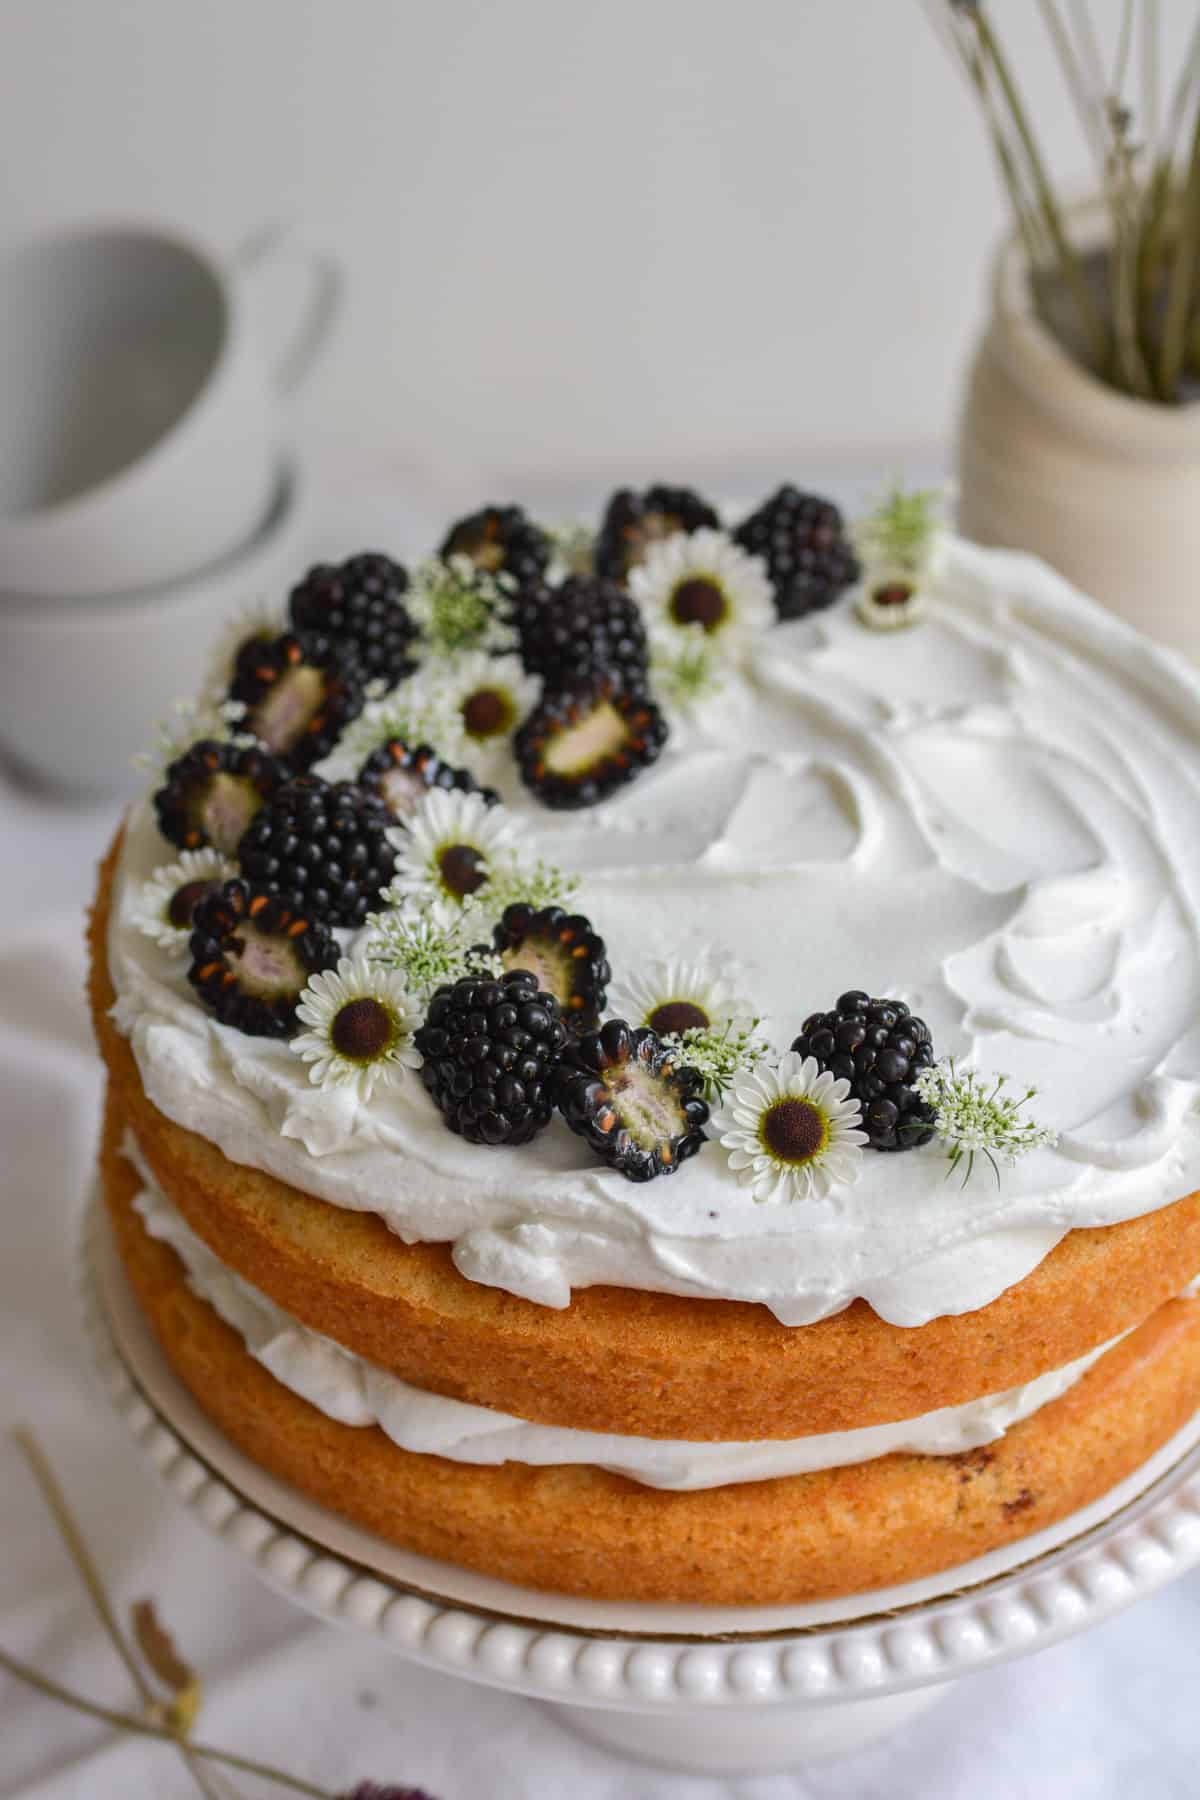 Picture of the finished vegan blackberry chantilly cake.